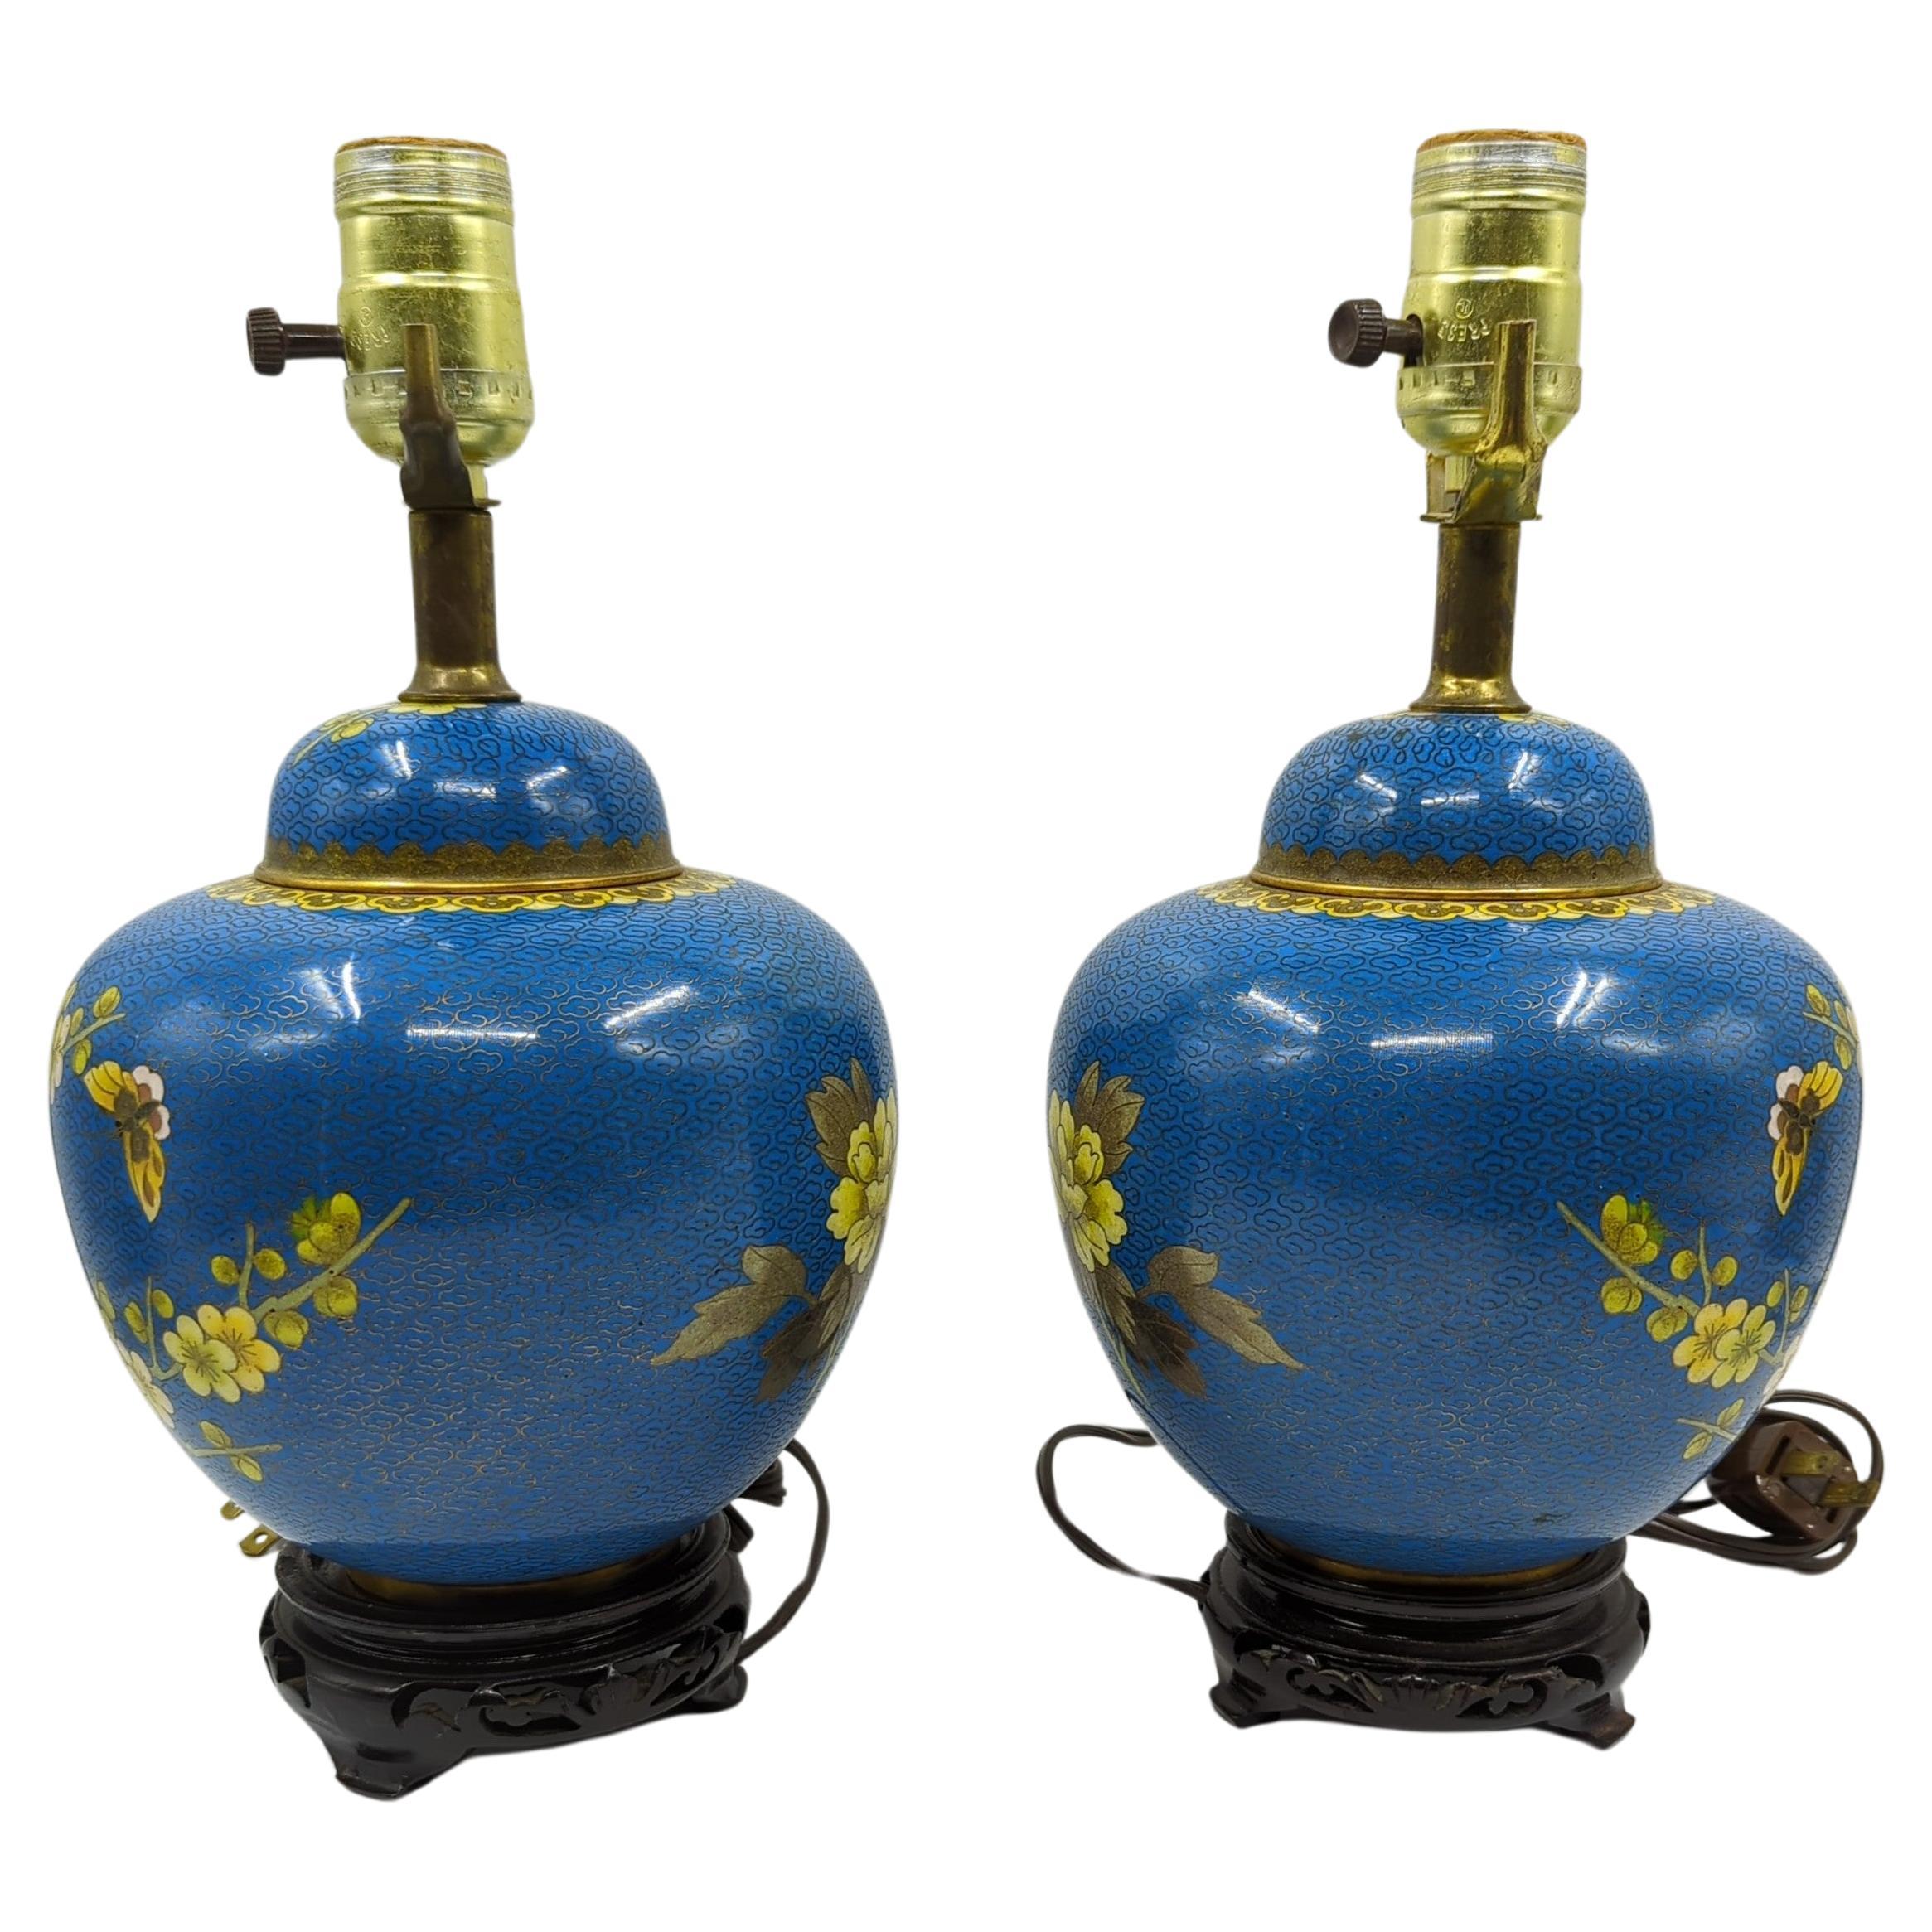 Pair Antique 19c Chinese Gilt Cloisonne Covered Prunus Ginger Jar Table Lamps For Sale 8